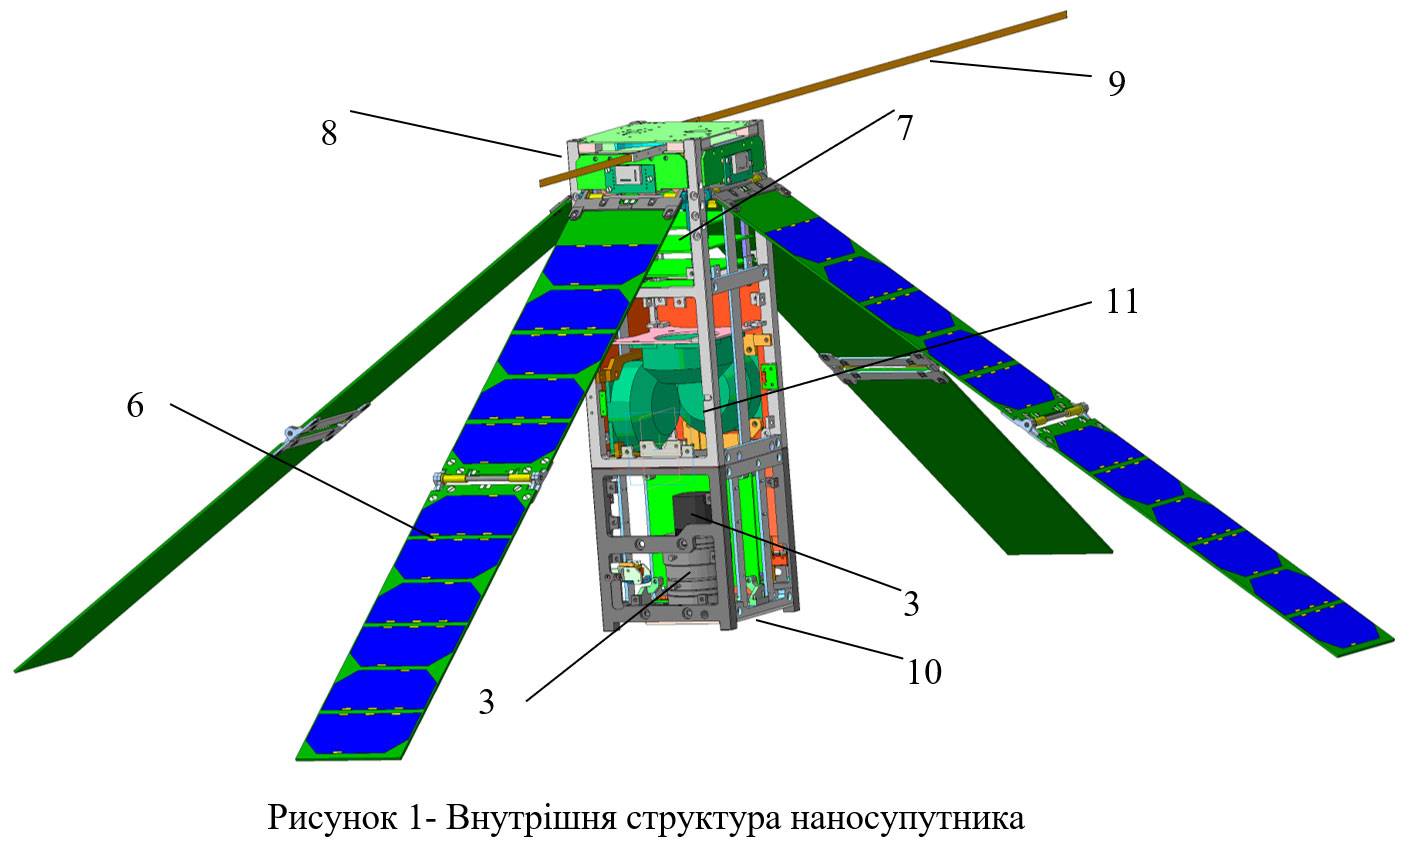 Research and testing of the flight model of the university nanosatellite PolyITAN-3-PUT format Cubesat for remote sensing of the Earth